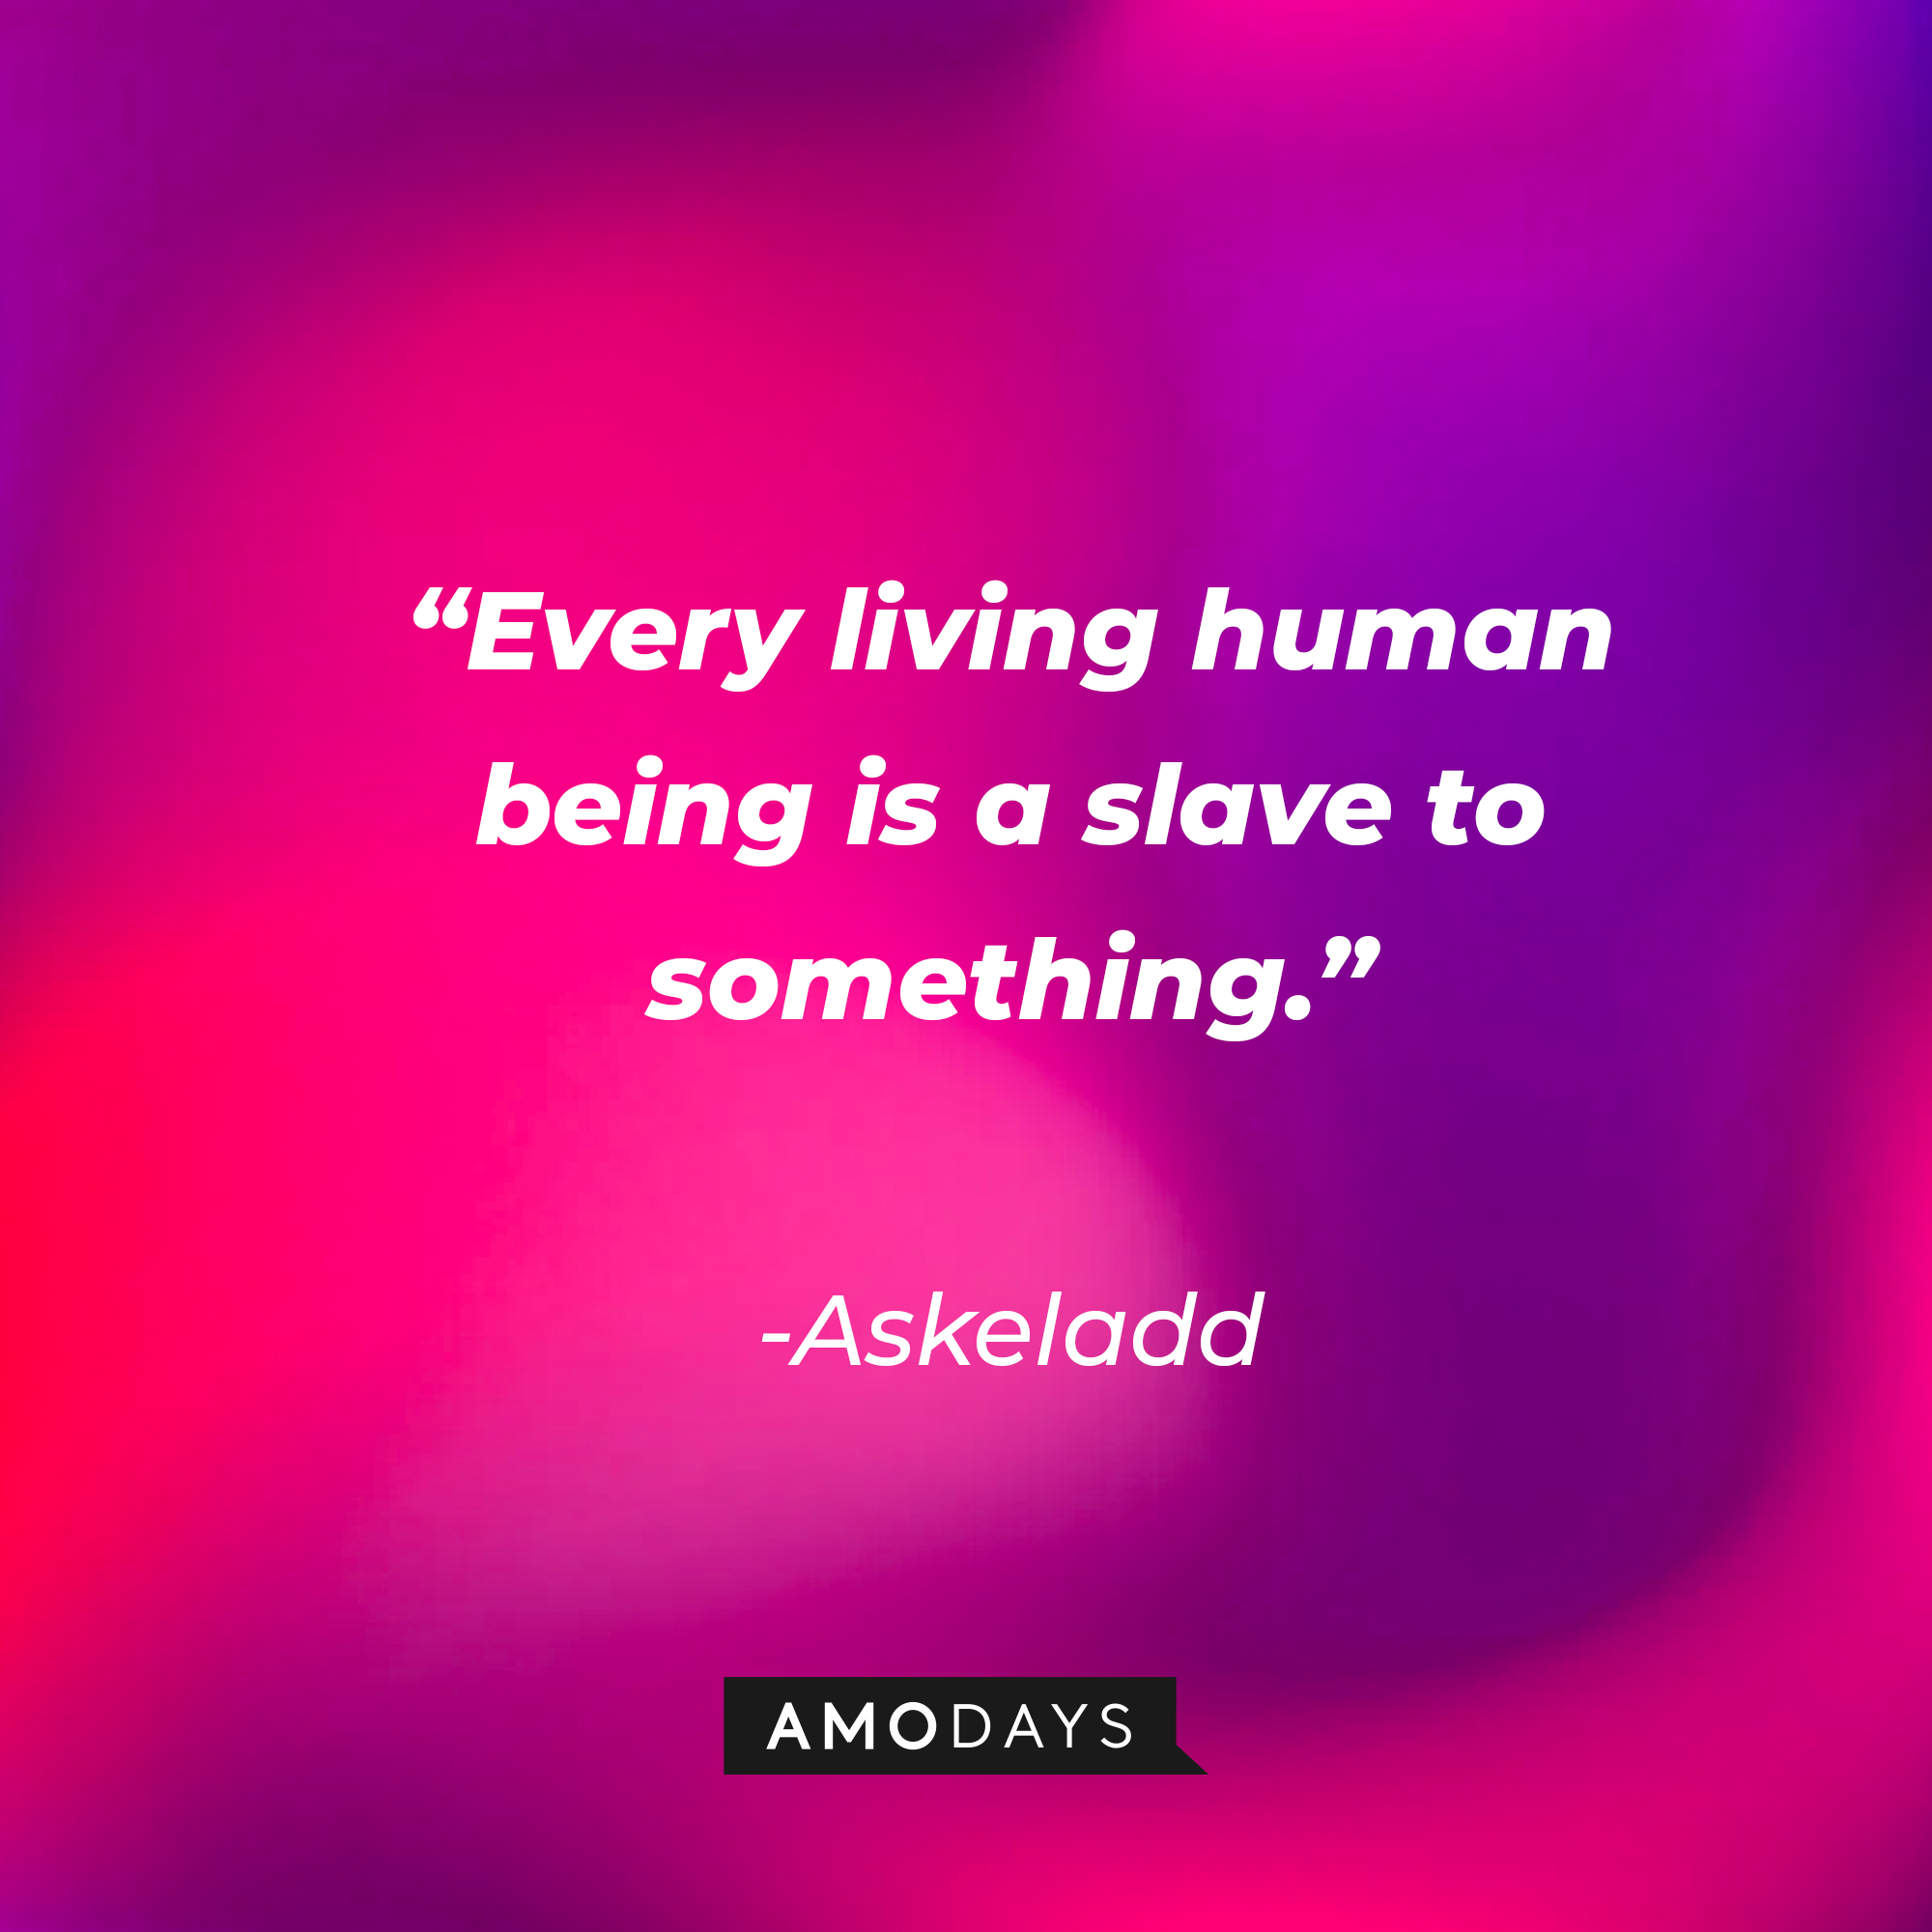 Askeladd’s quote: “Every living human being is a slave to something.” | Source: Amodays